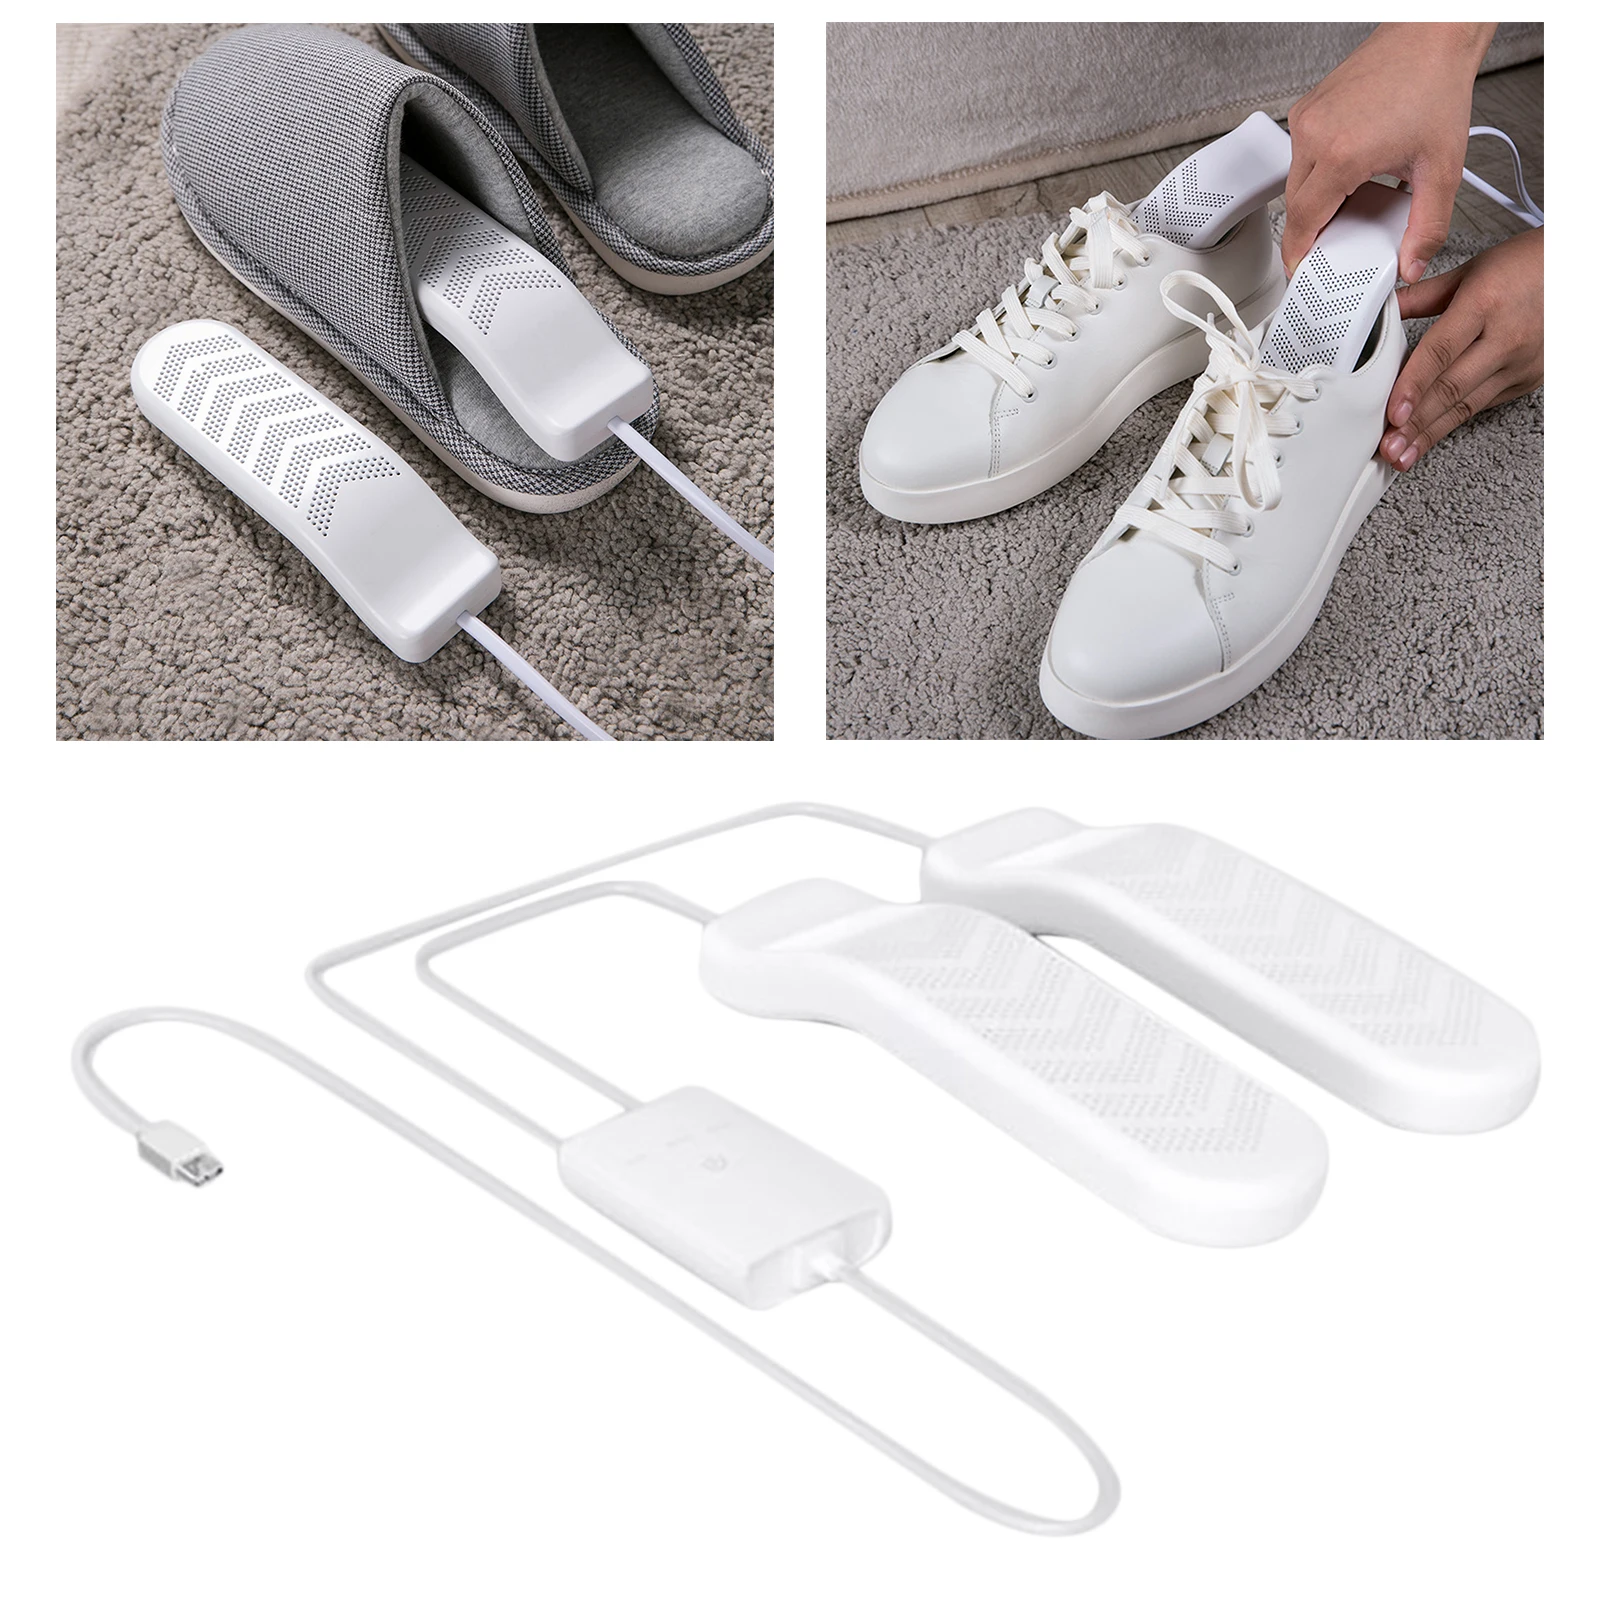 Portable USB Electric Boot Dryer Shoe Dryer Foot Dryer Timing Disinfection Foot Dryer Glove Dryer